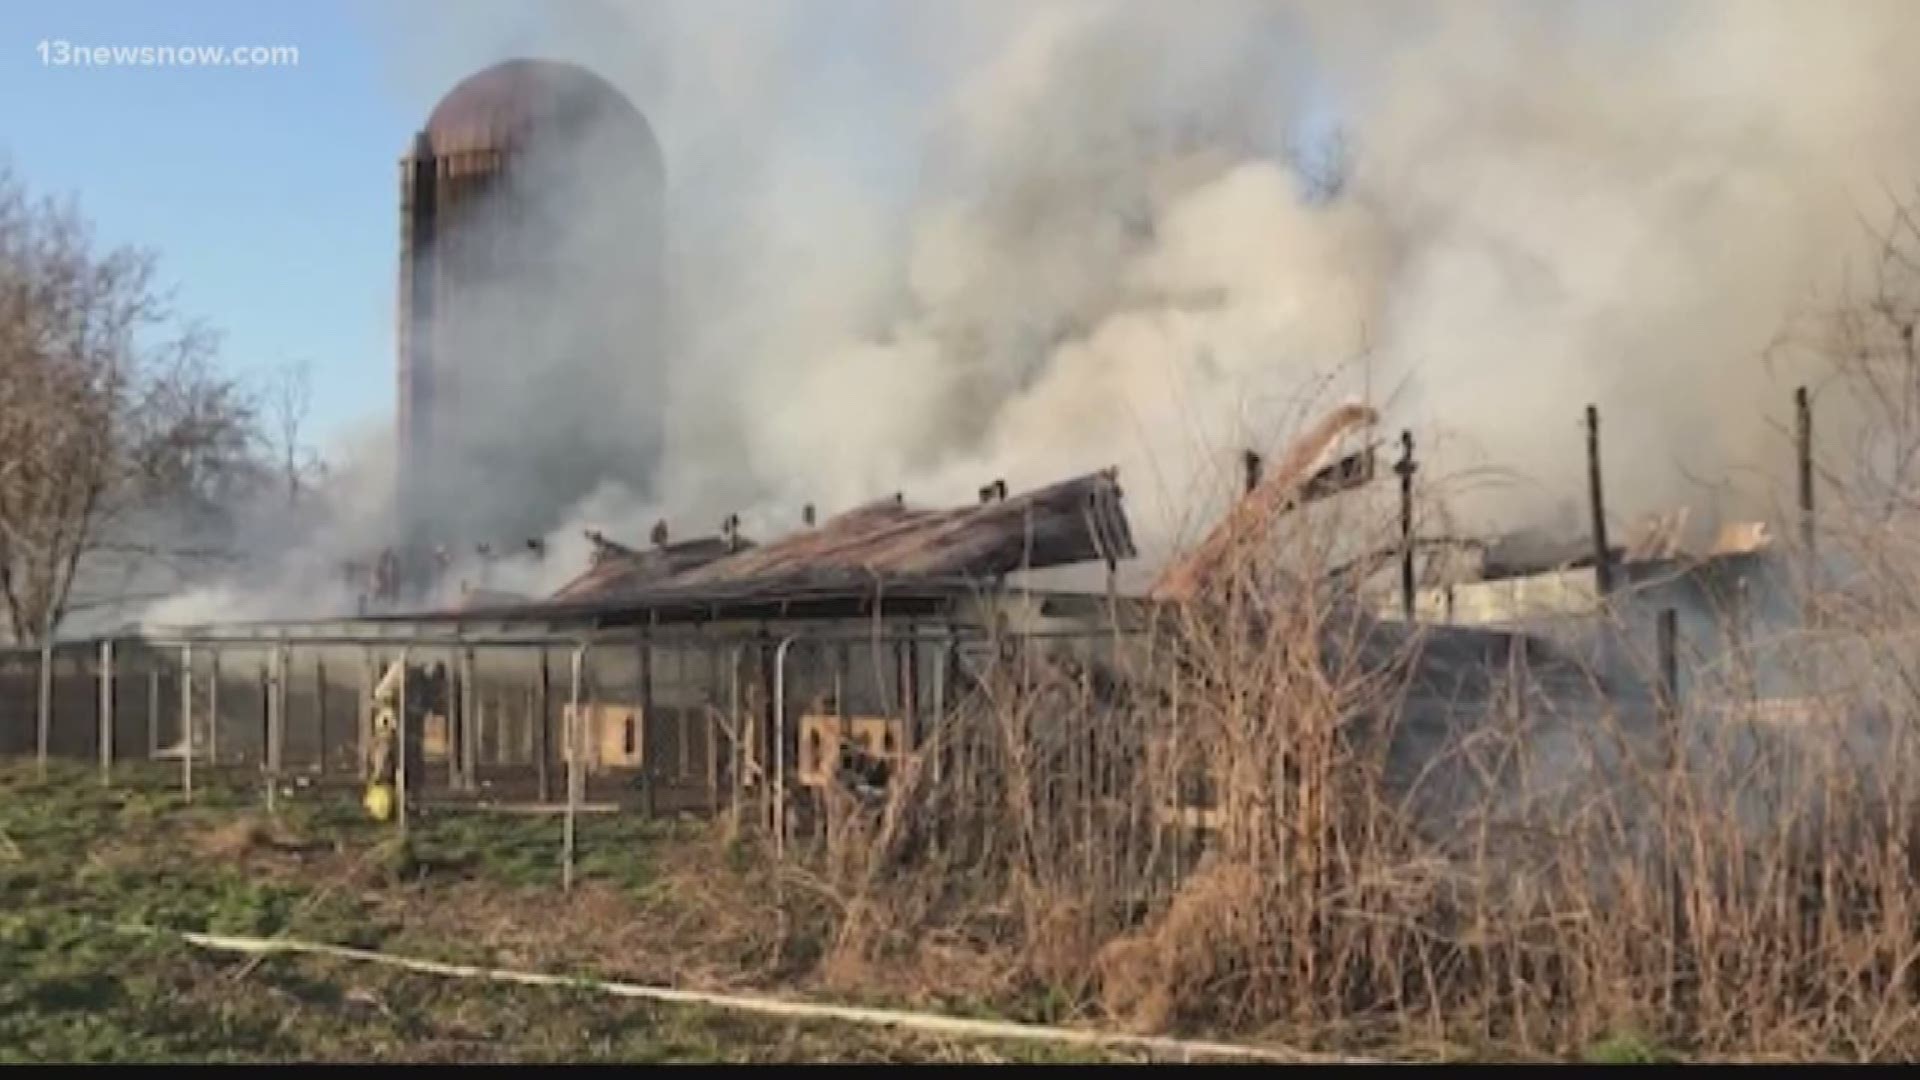 A barn fire in Suffolk killed several dogs and puppies while others got away. Volunteers are looking for the dogs that got away, but the barn is a total loss.